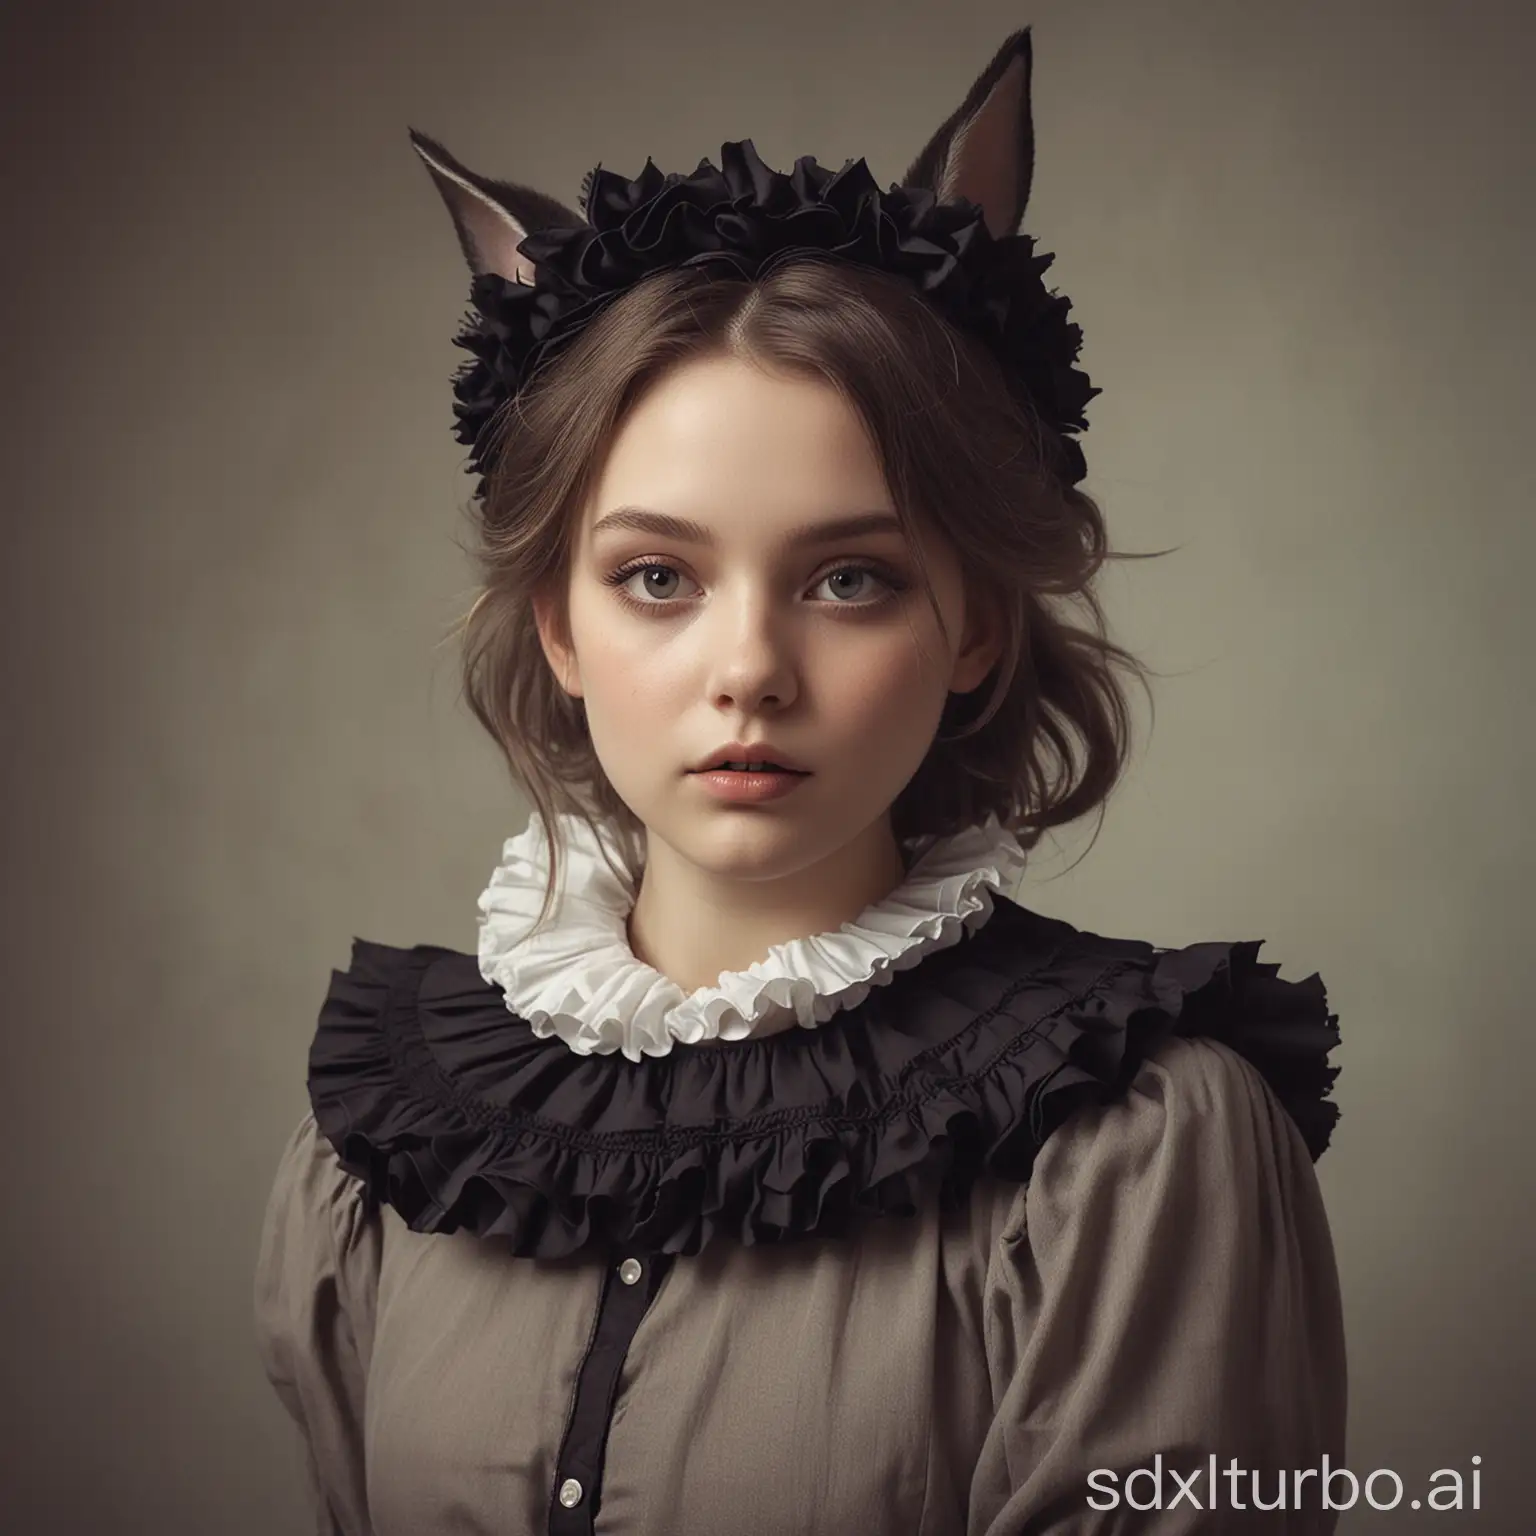 Ethereal-Bunny-Girl-with-Ruffled-Collar-and-Black-Crown